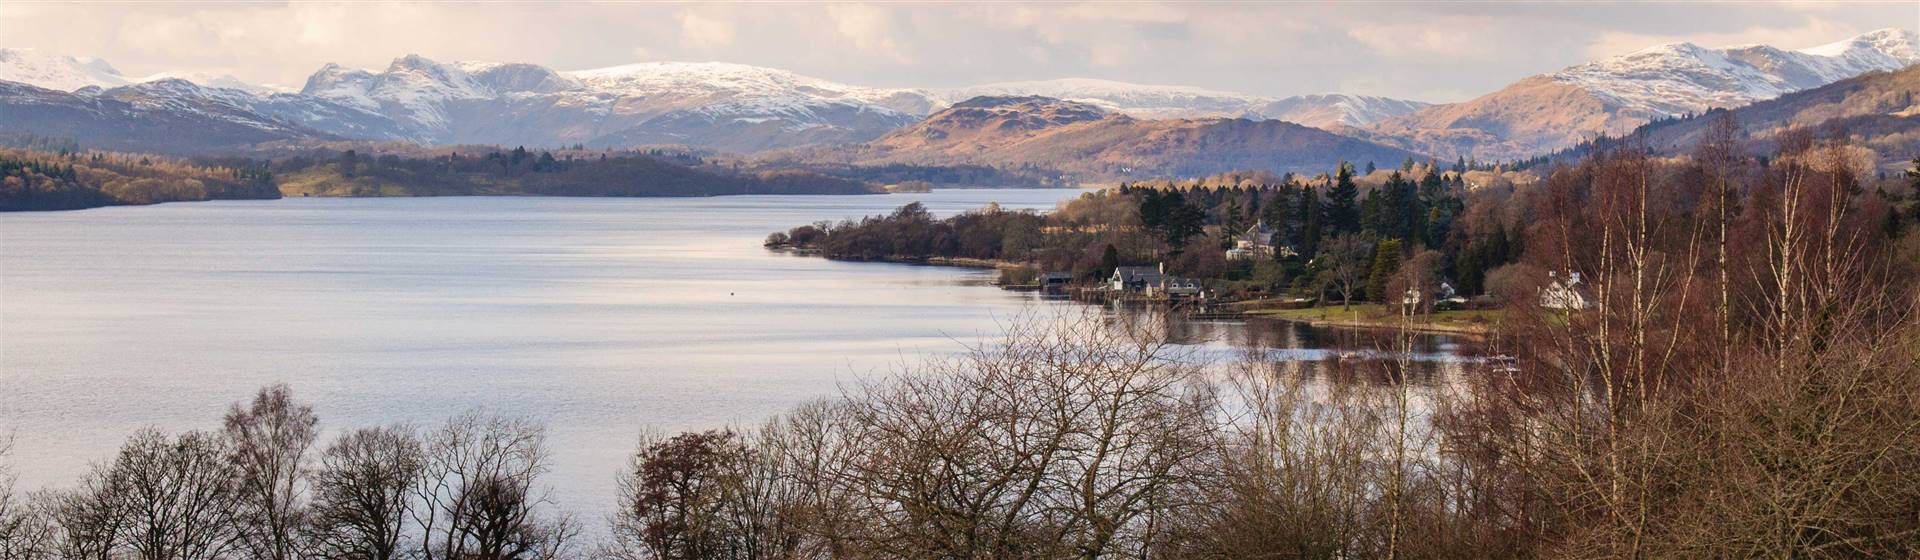 All Inclusive Stay at The Lake District 